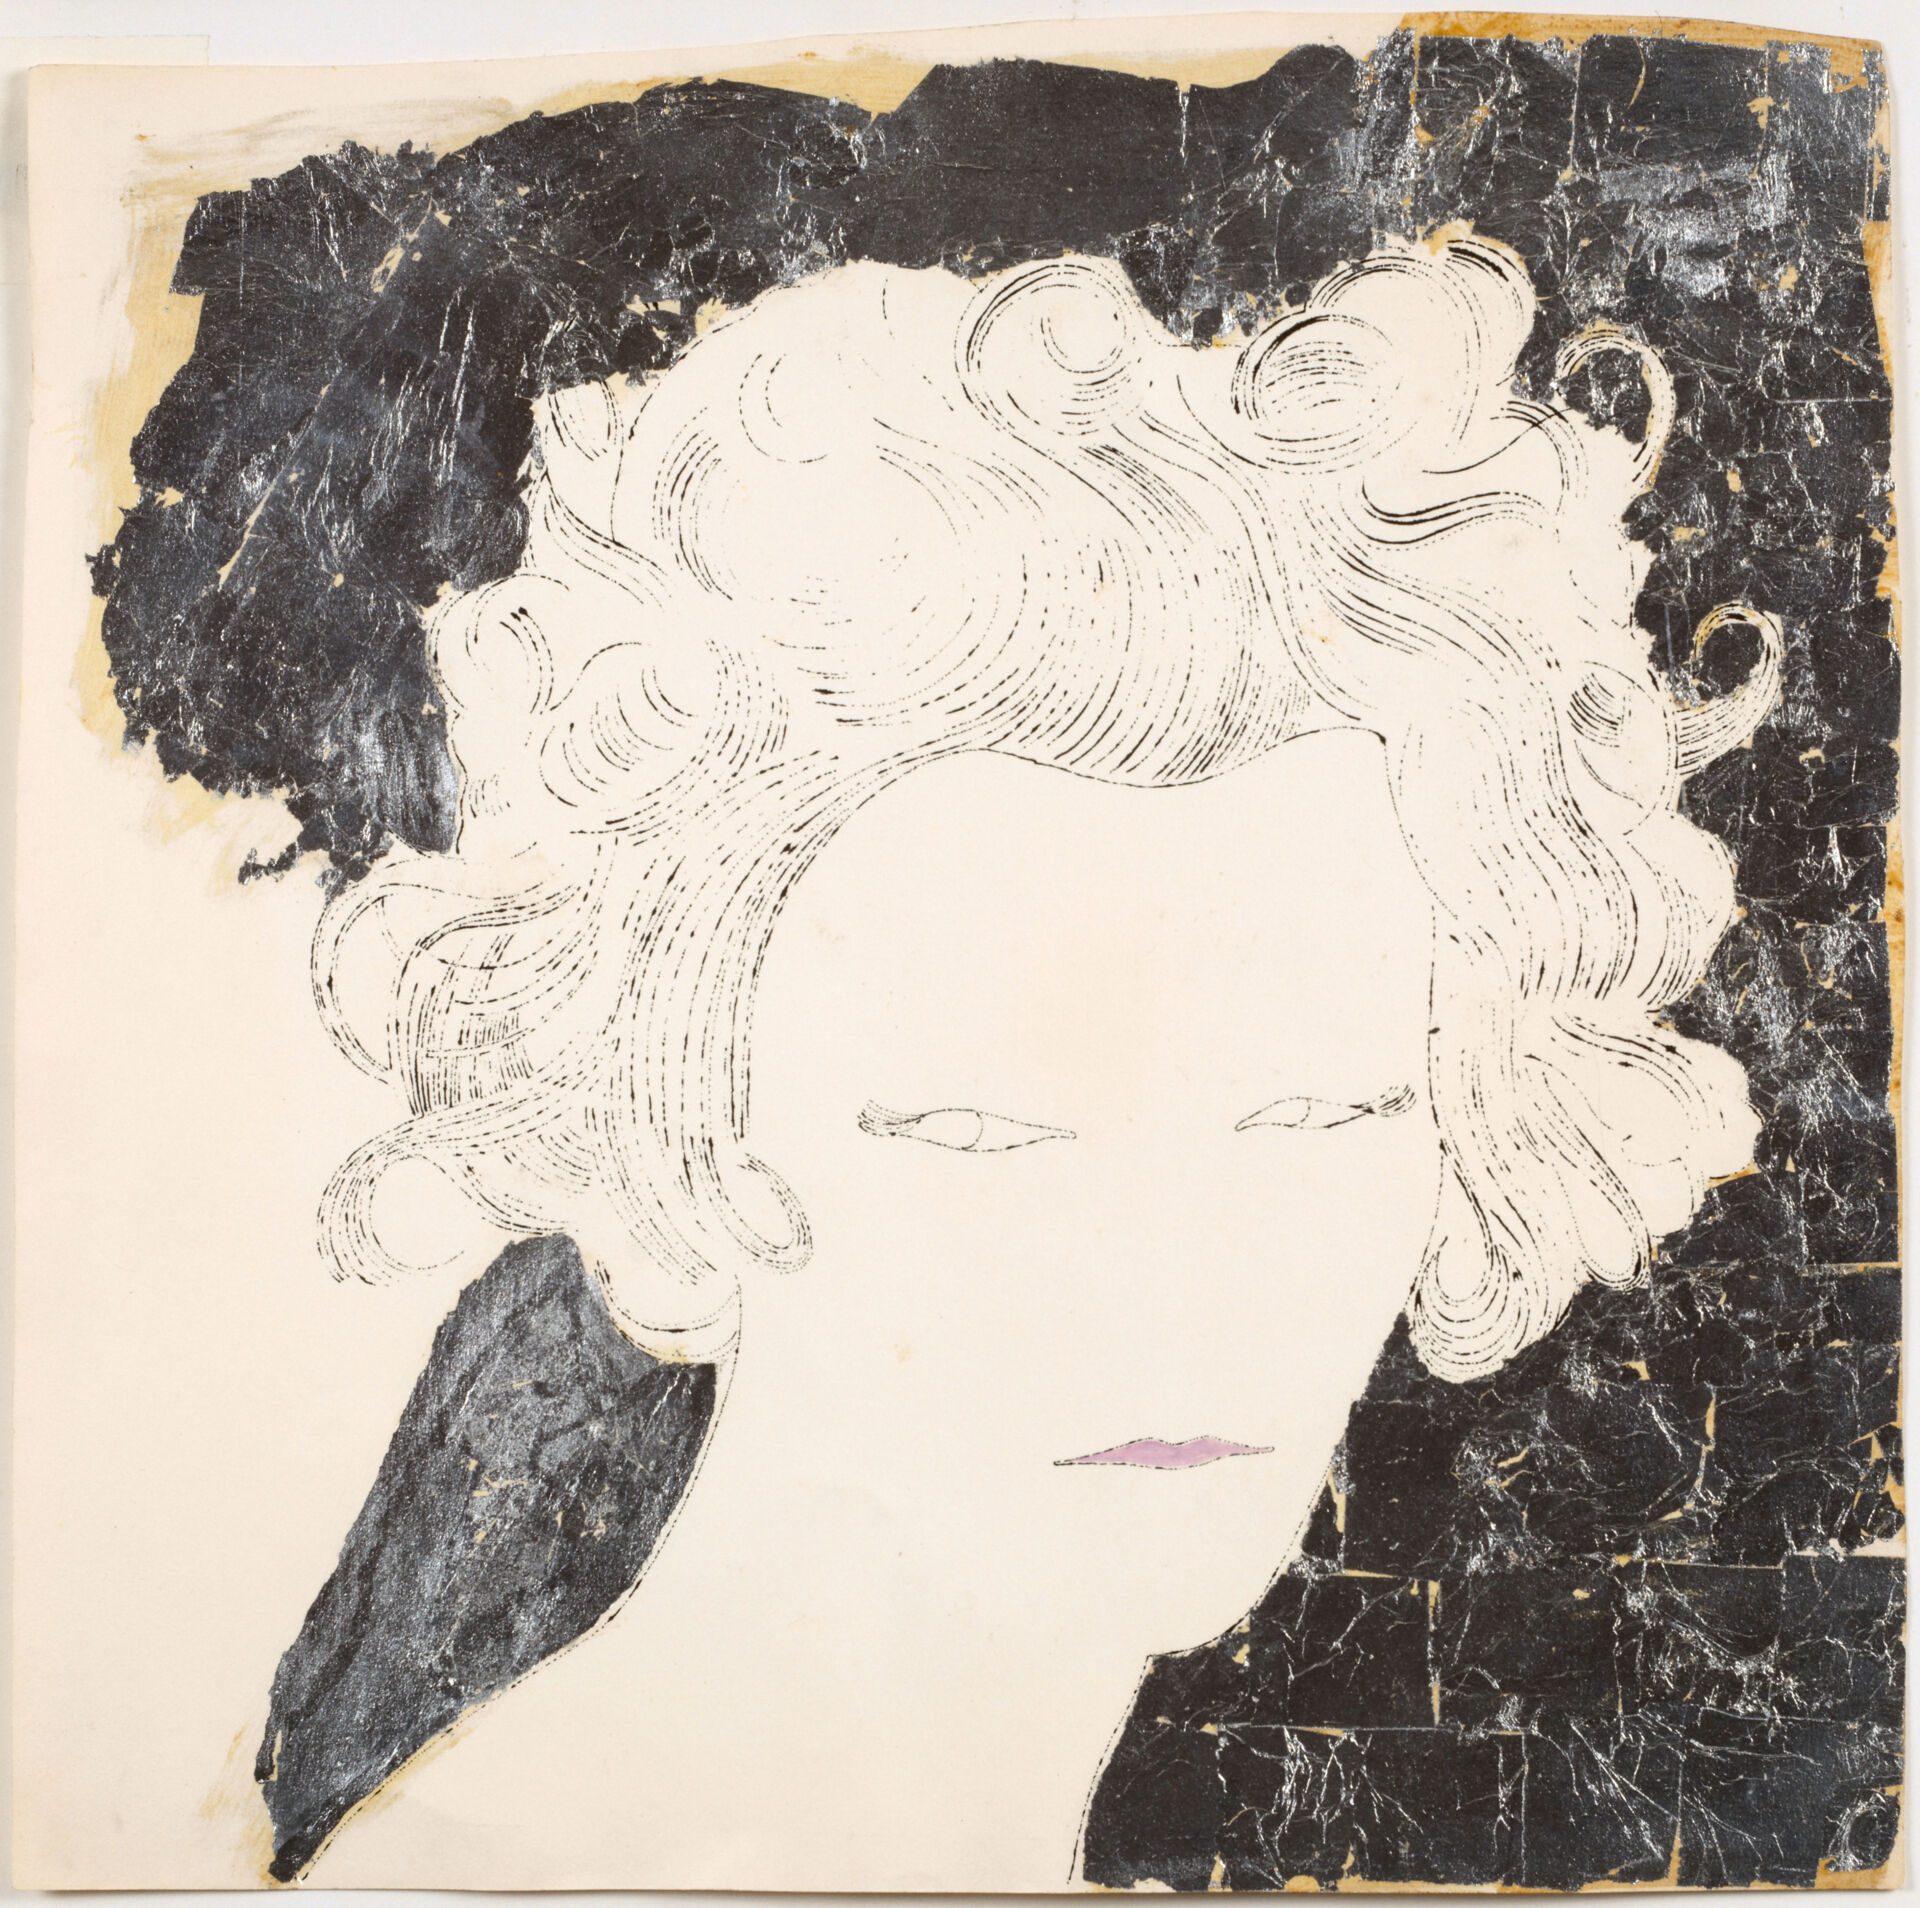 ANDY WARHOL (1928–1987)
Woman, ca. 1953/54 
36,8 x 37,3 cm
Counterproof with black ink, tempera in rosé and glued-on silver foil 
Kunstmuseum Basel, Kupferstichkabinett, 
Inv. 1997.431, acquired with funds from the Max Geldner Foundation 1997
© The Andy Warhol Foundation for the Visual Arts, Inc. / 2023, ProLitteris, Zurich